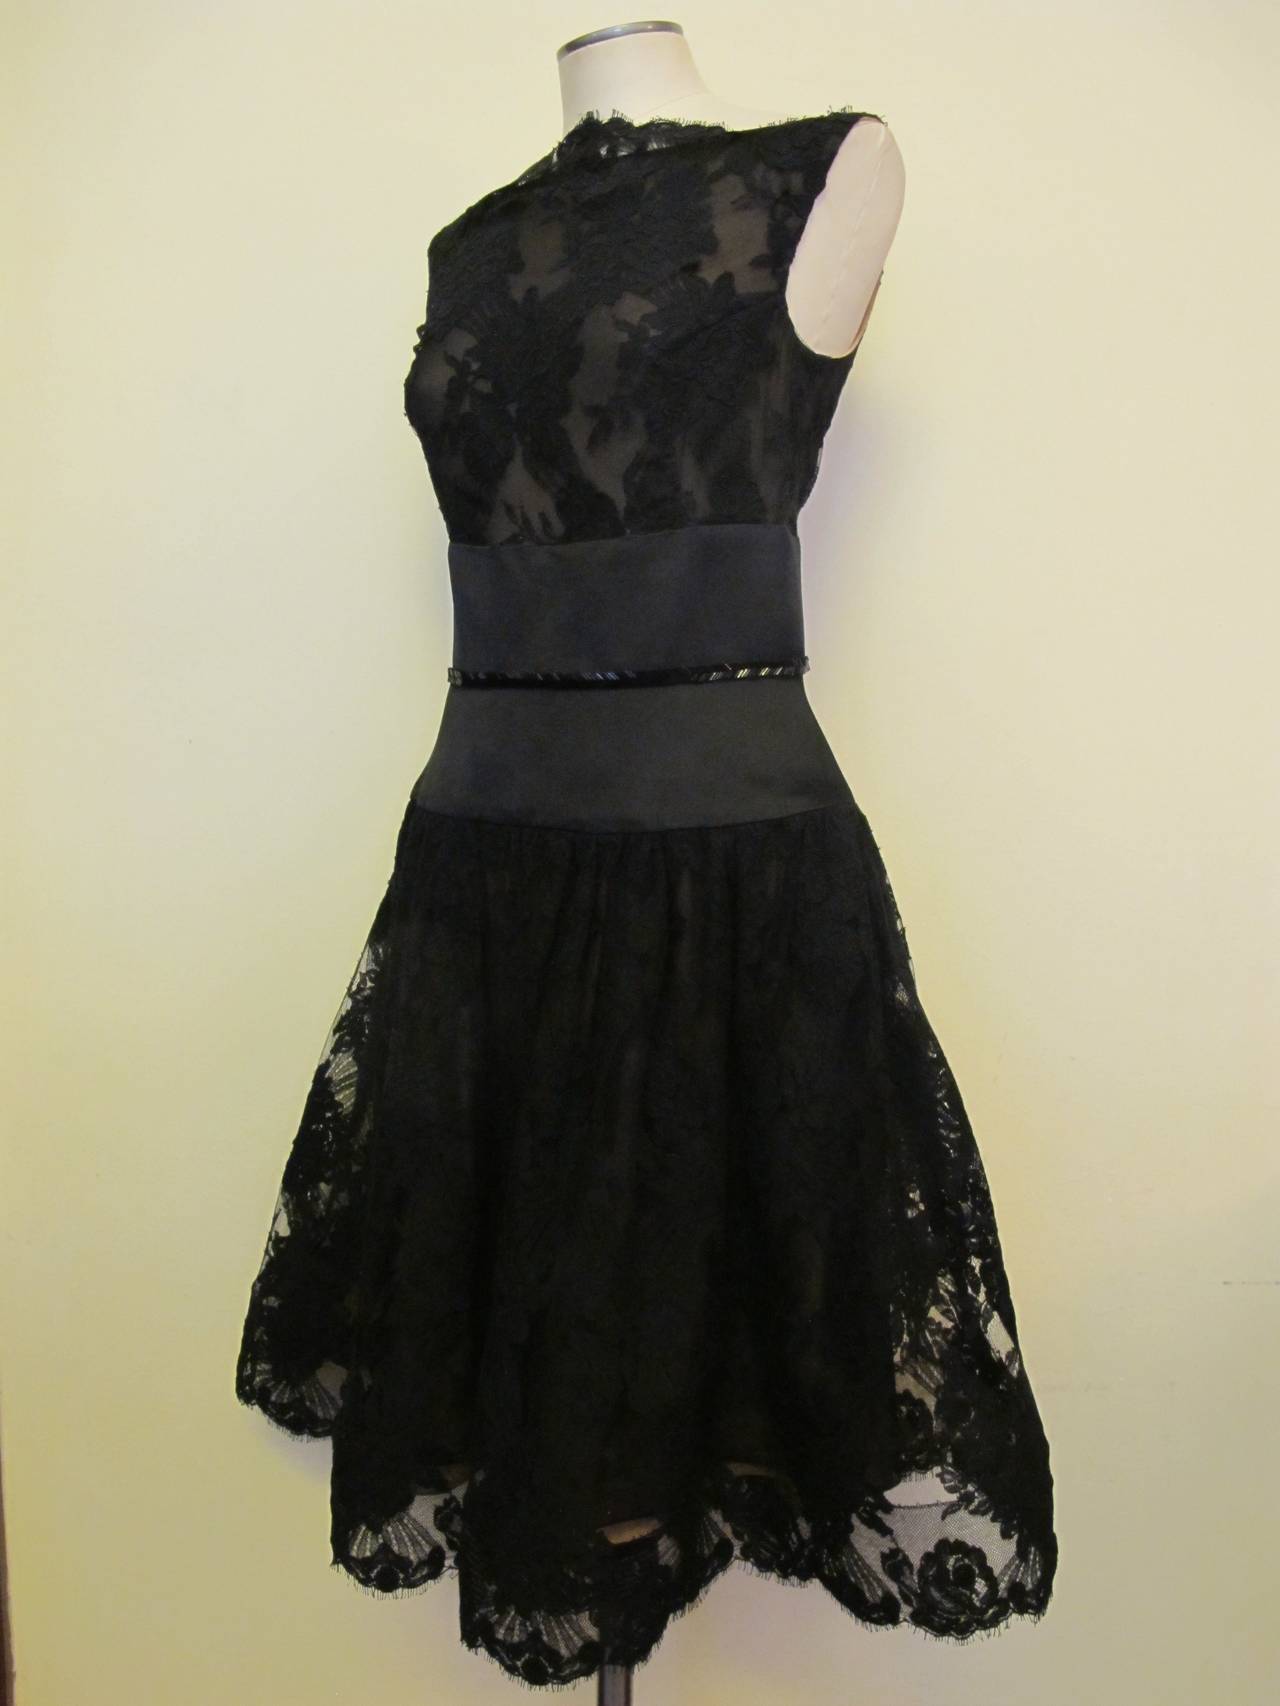 This exquisite black bateau neckline cocktail dress has an empire waist of duchess black satin and strip of black bugle beads in a chevron design. Alençon lace adorns the bodice and skirt of the cocktail dress and 2.75 inch horsehair gives body to